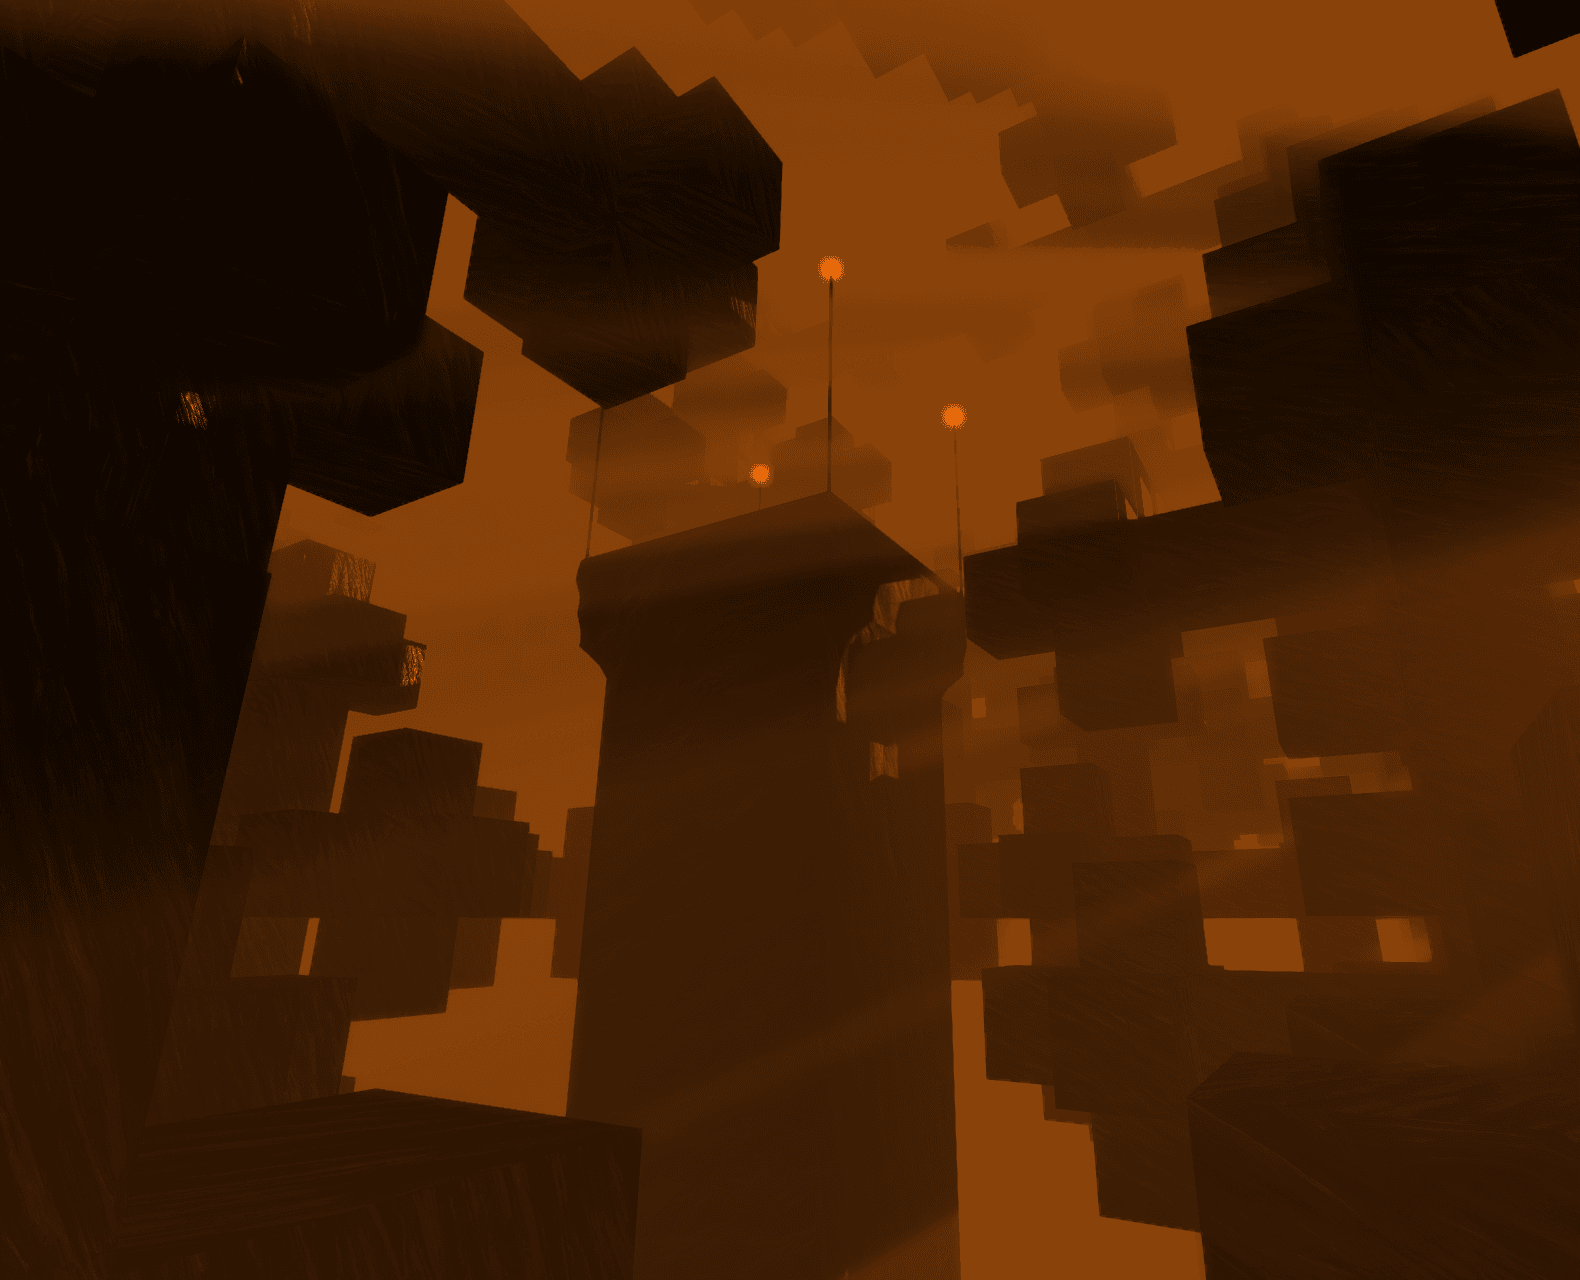 A screenshot of the smoke level.  Shows intense orange fog and godrays, floating fractal structures composed out of large dark cubes with stone-like texturing and patterns, and four orange/yellow lights glowing in the distance supported by long poles.